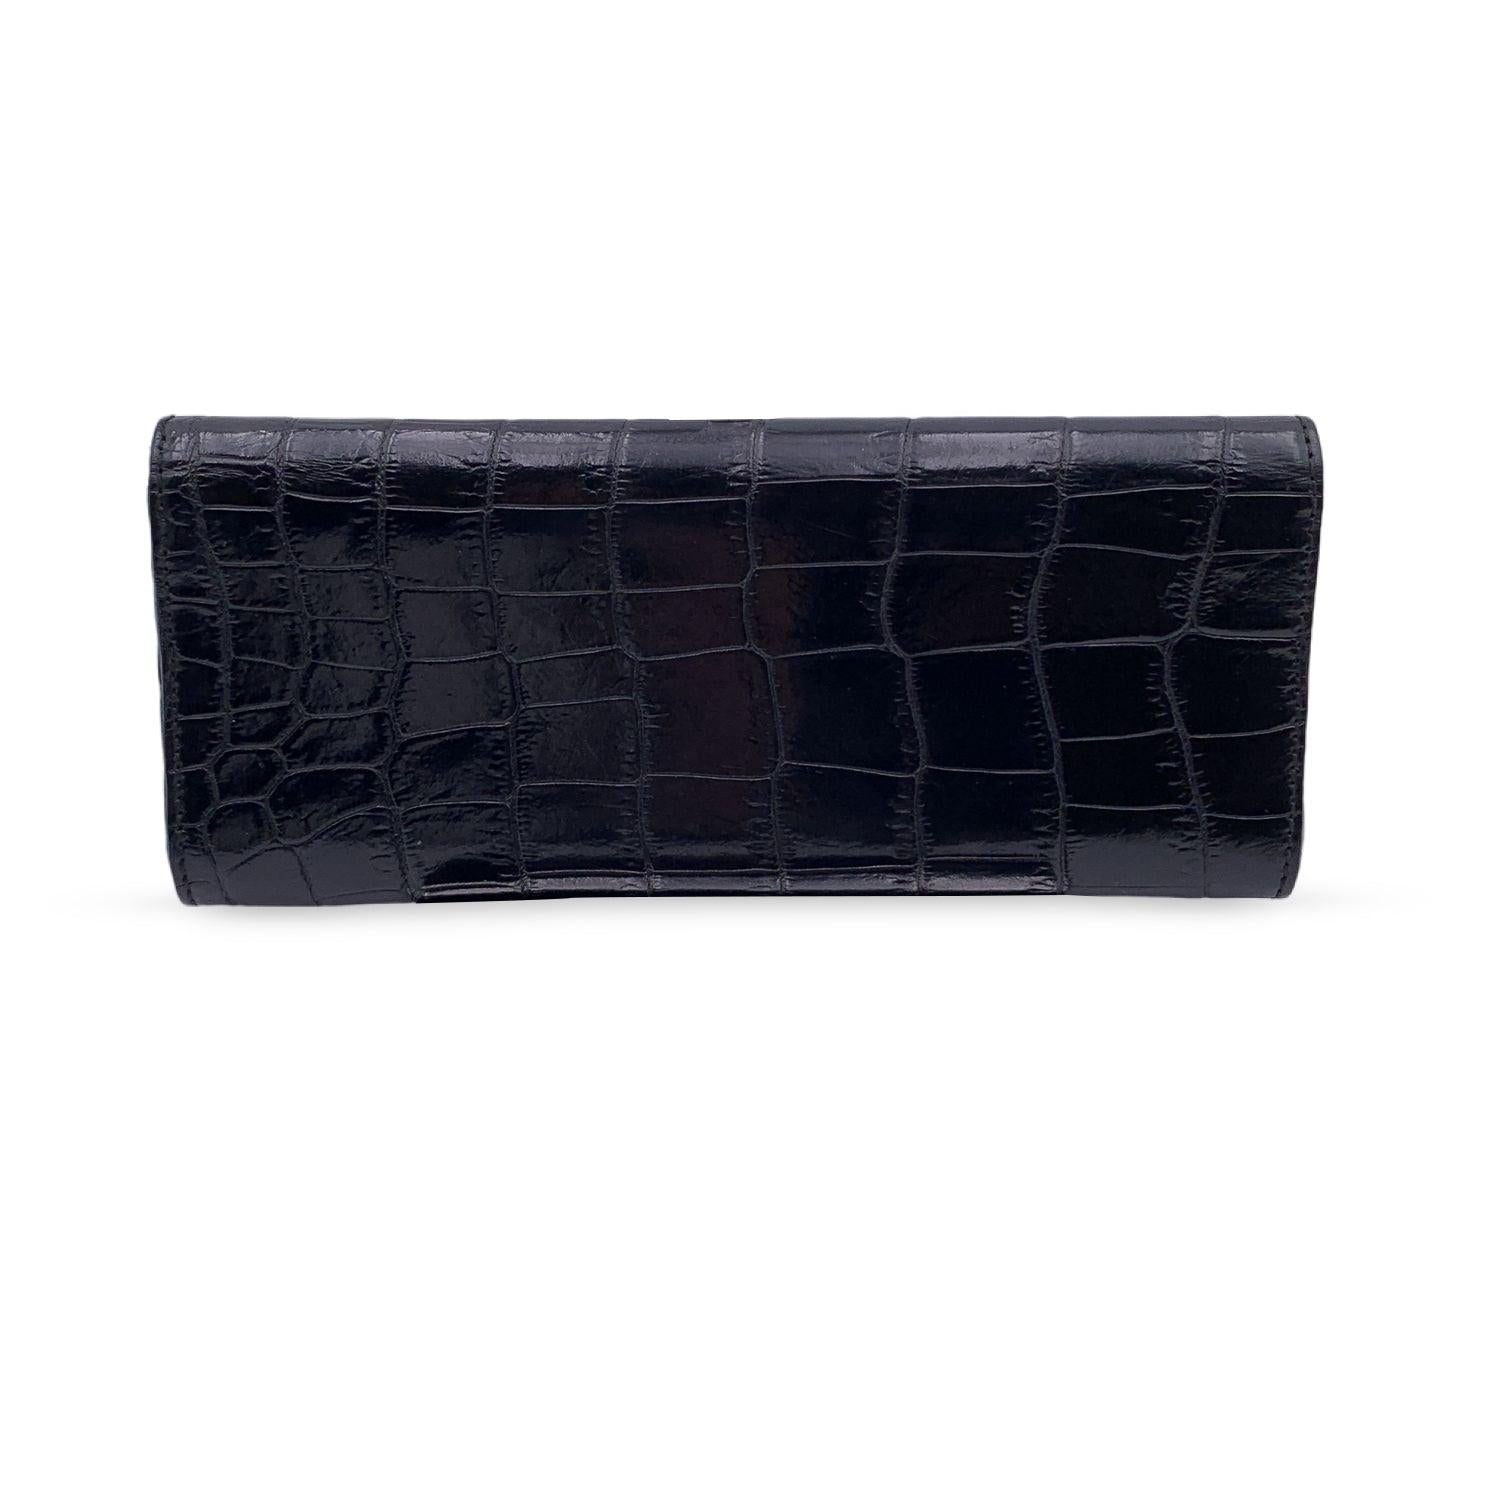 Women's Gucci Black Embossed Leather Romy Clutch Bag Wallet